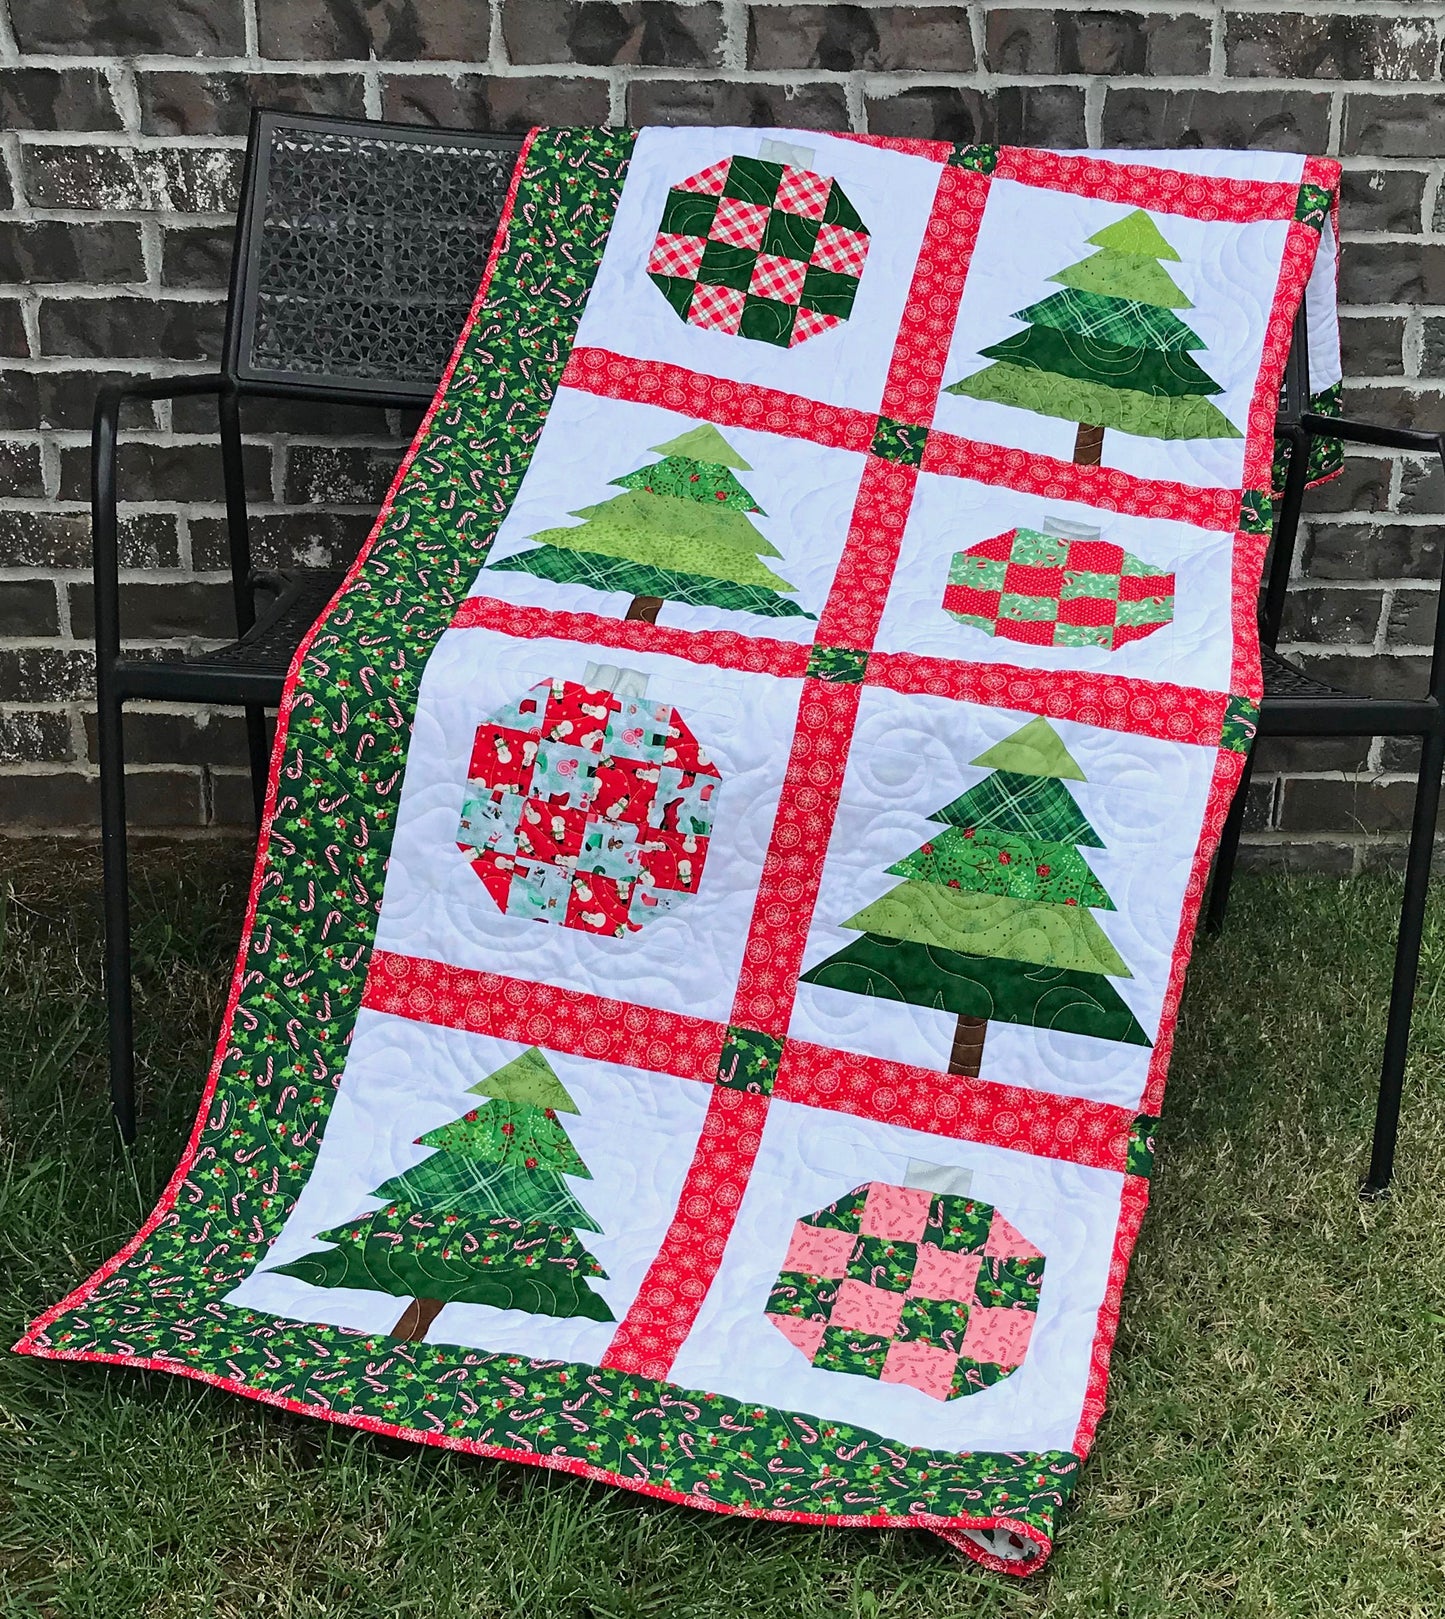 Christmastime quilt pattern with Christmas trees and ornament blocks surrounded by red sashing and a green holly border. Quilt is shown hanging on a fence.